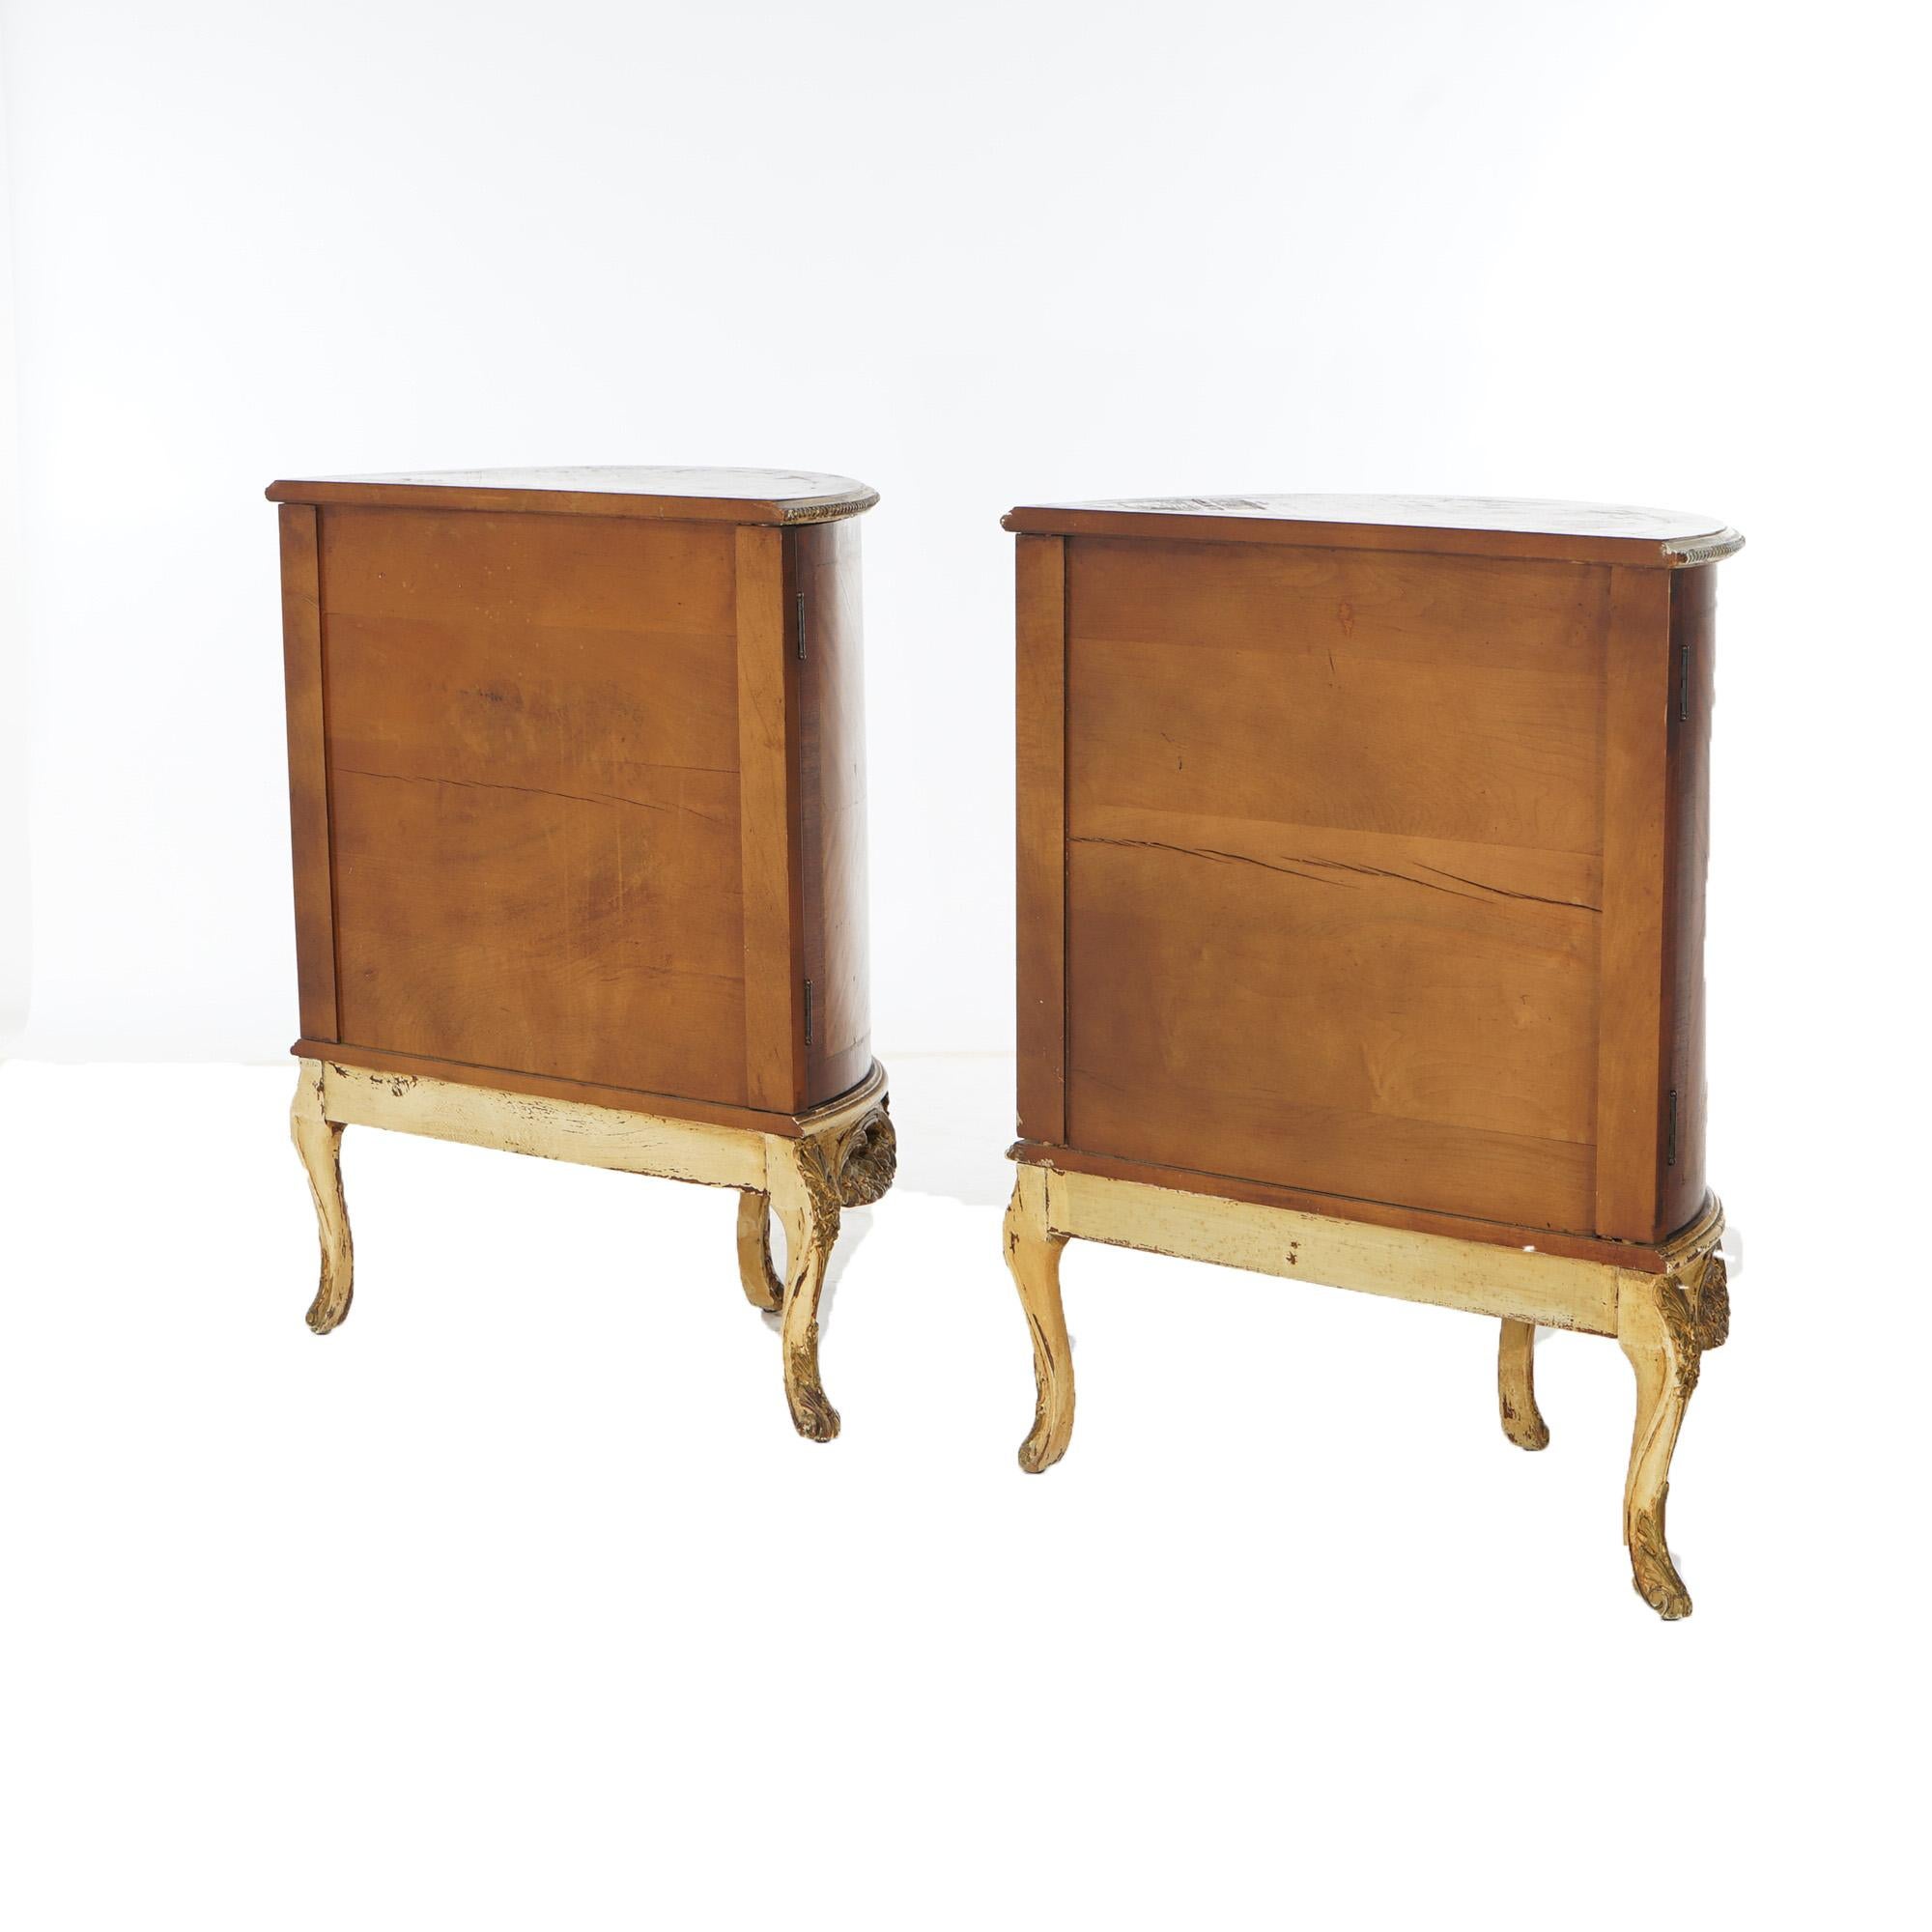 Two Antique Antique French Satinwood Inlaid Marquetry Demilune Side Tables C1920 For Sale 11